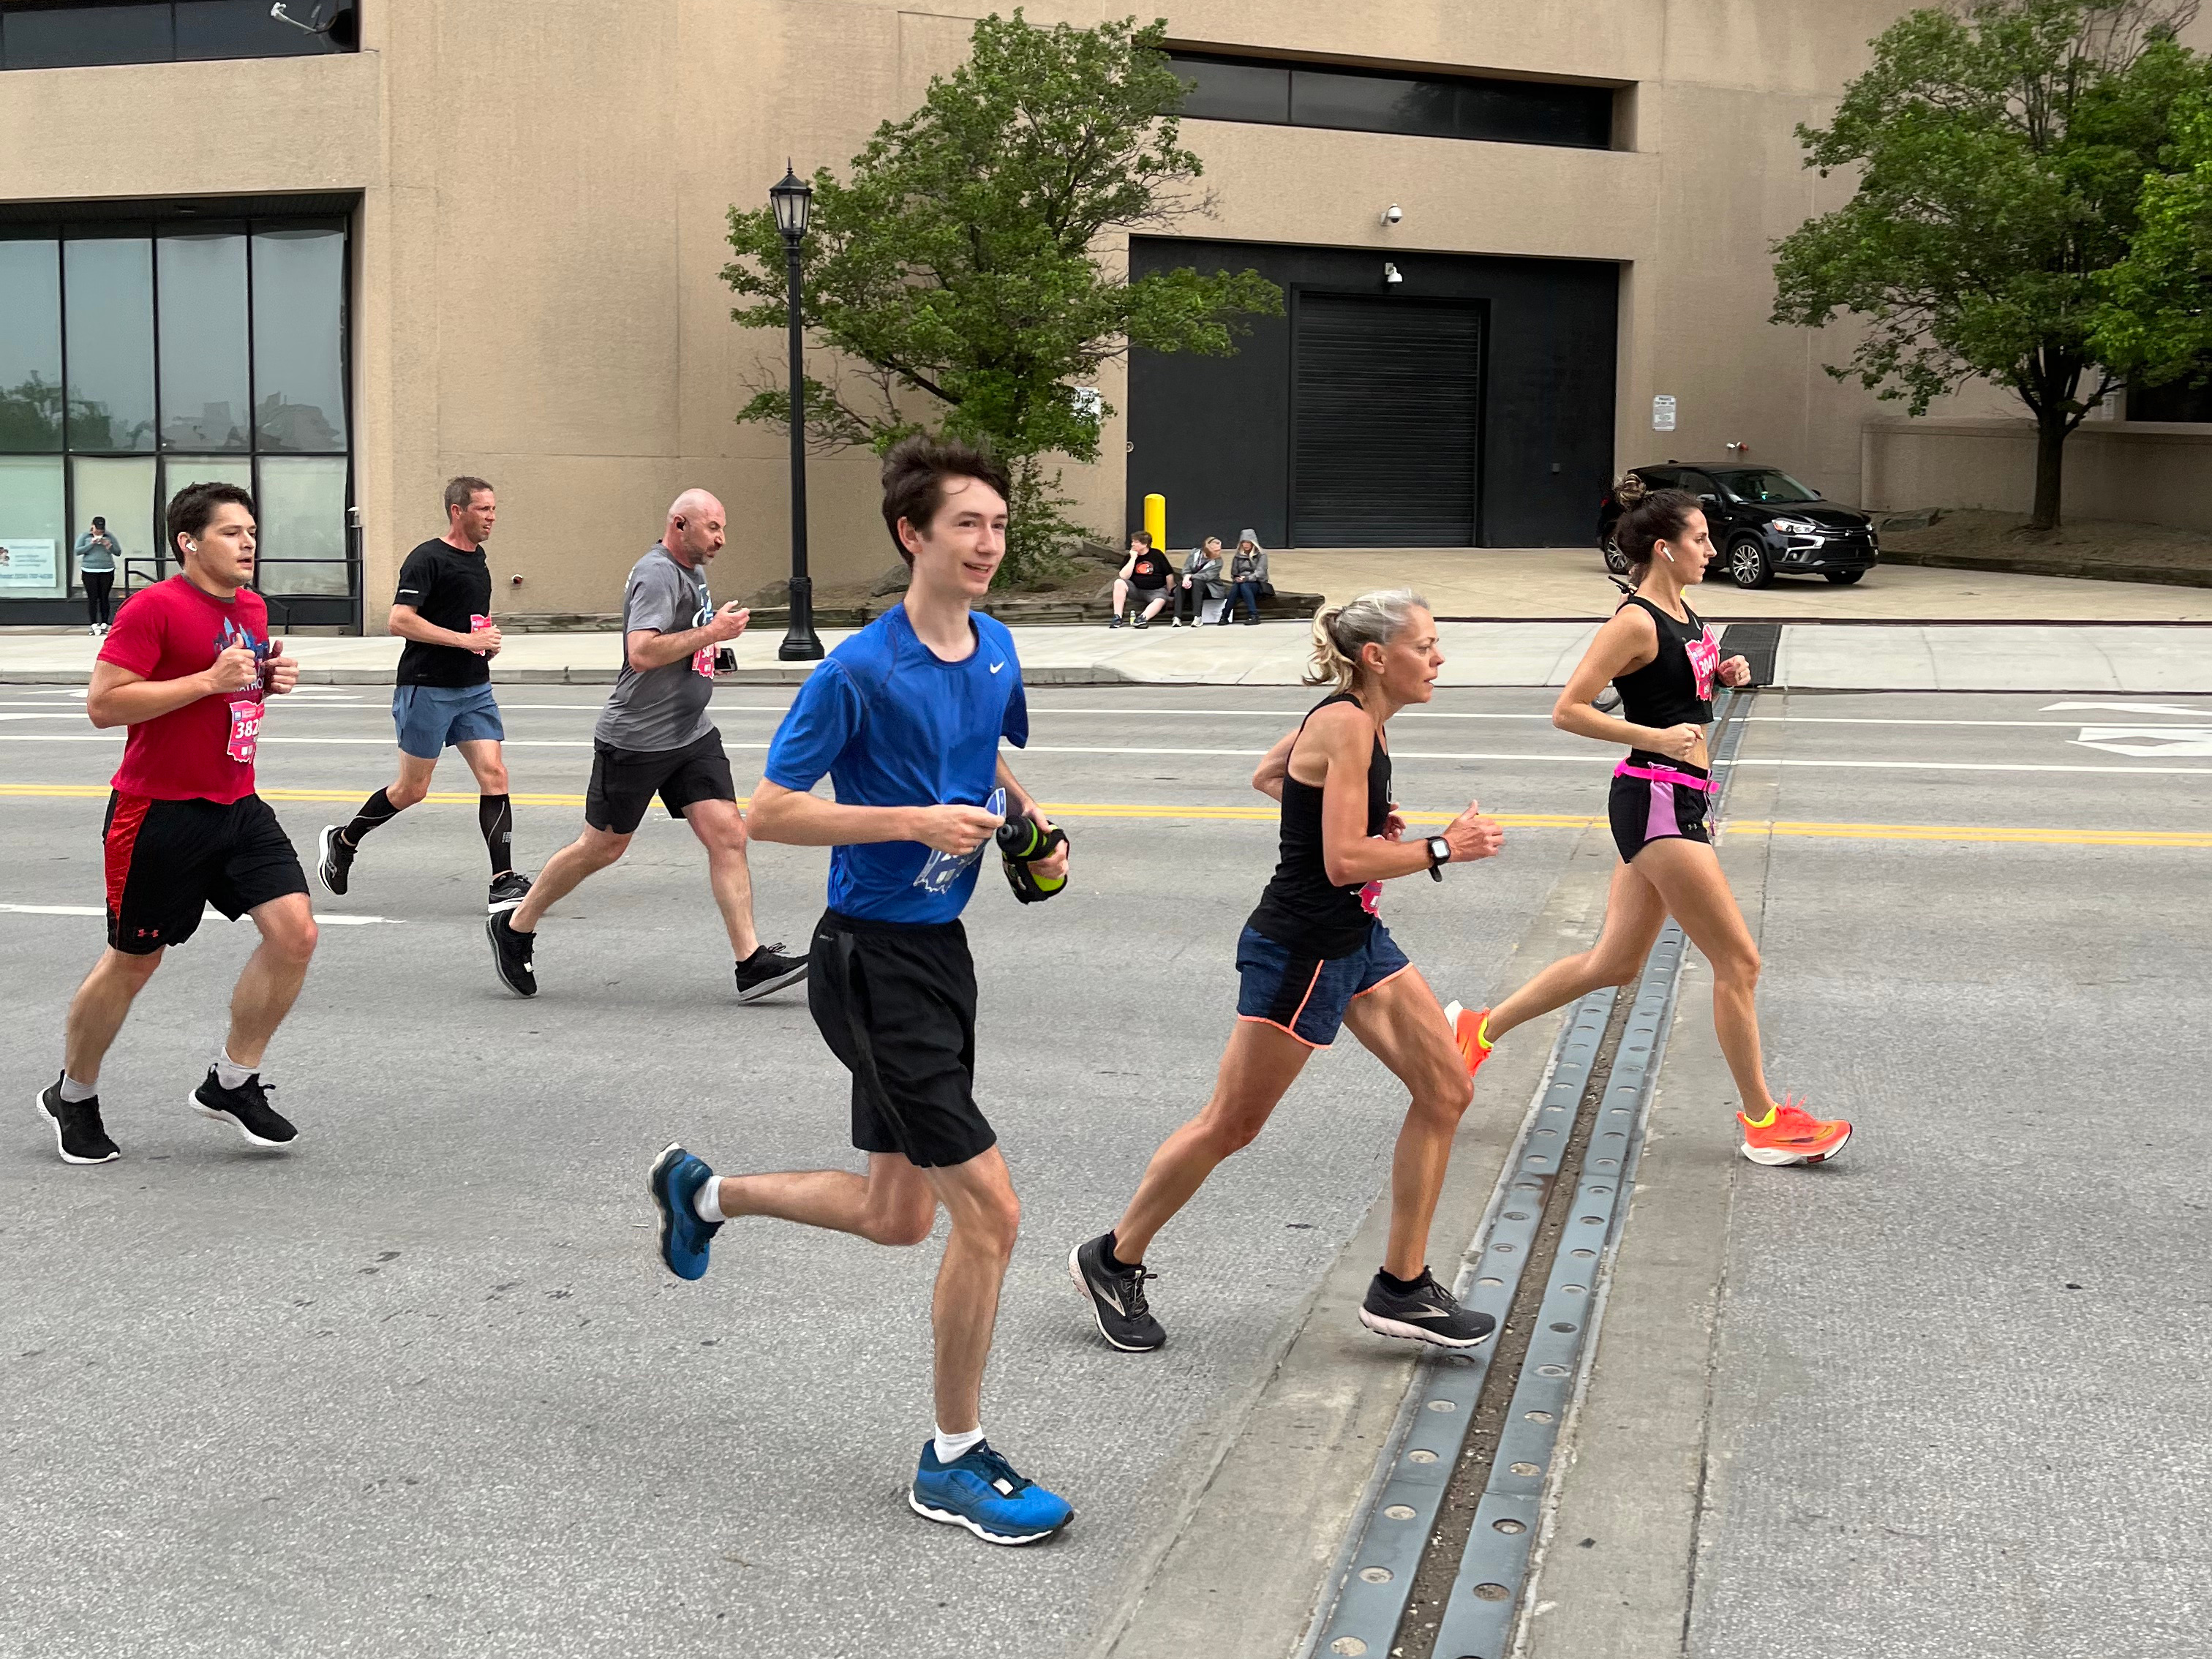 Me, running in a blue shirt and carrying a yellow water bottle. I'm smiling. There are other runners around me.